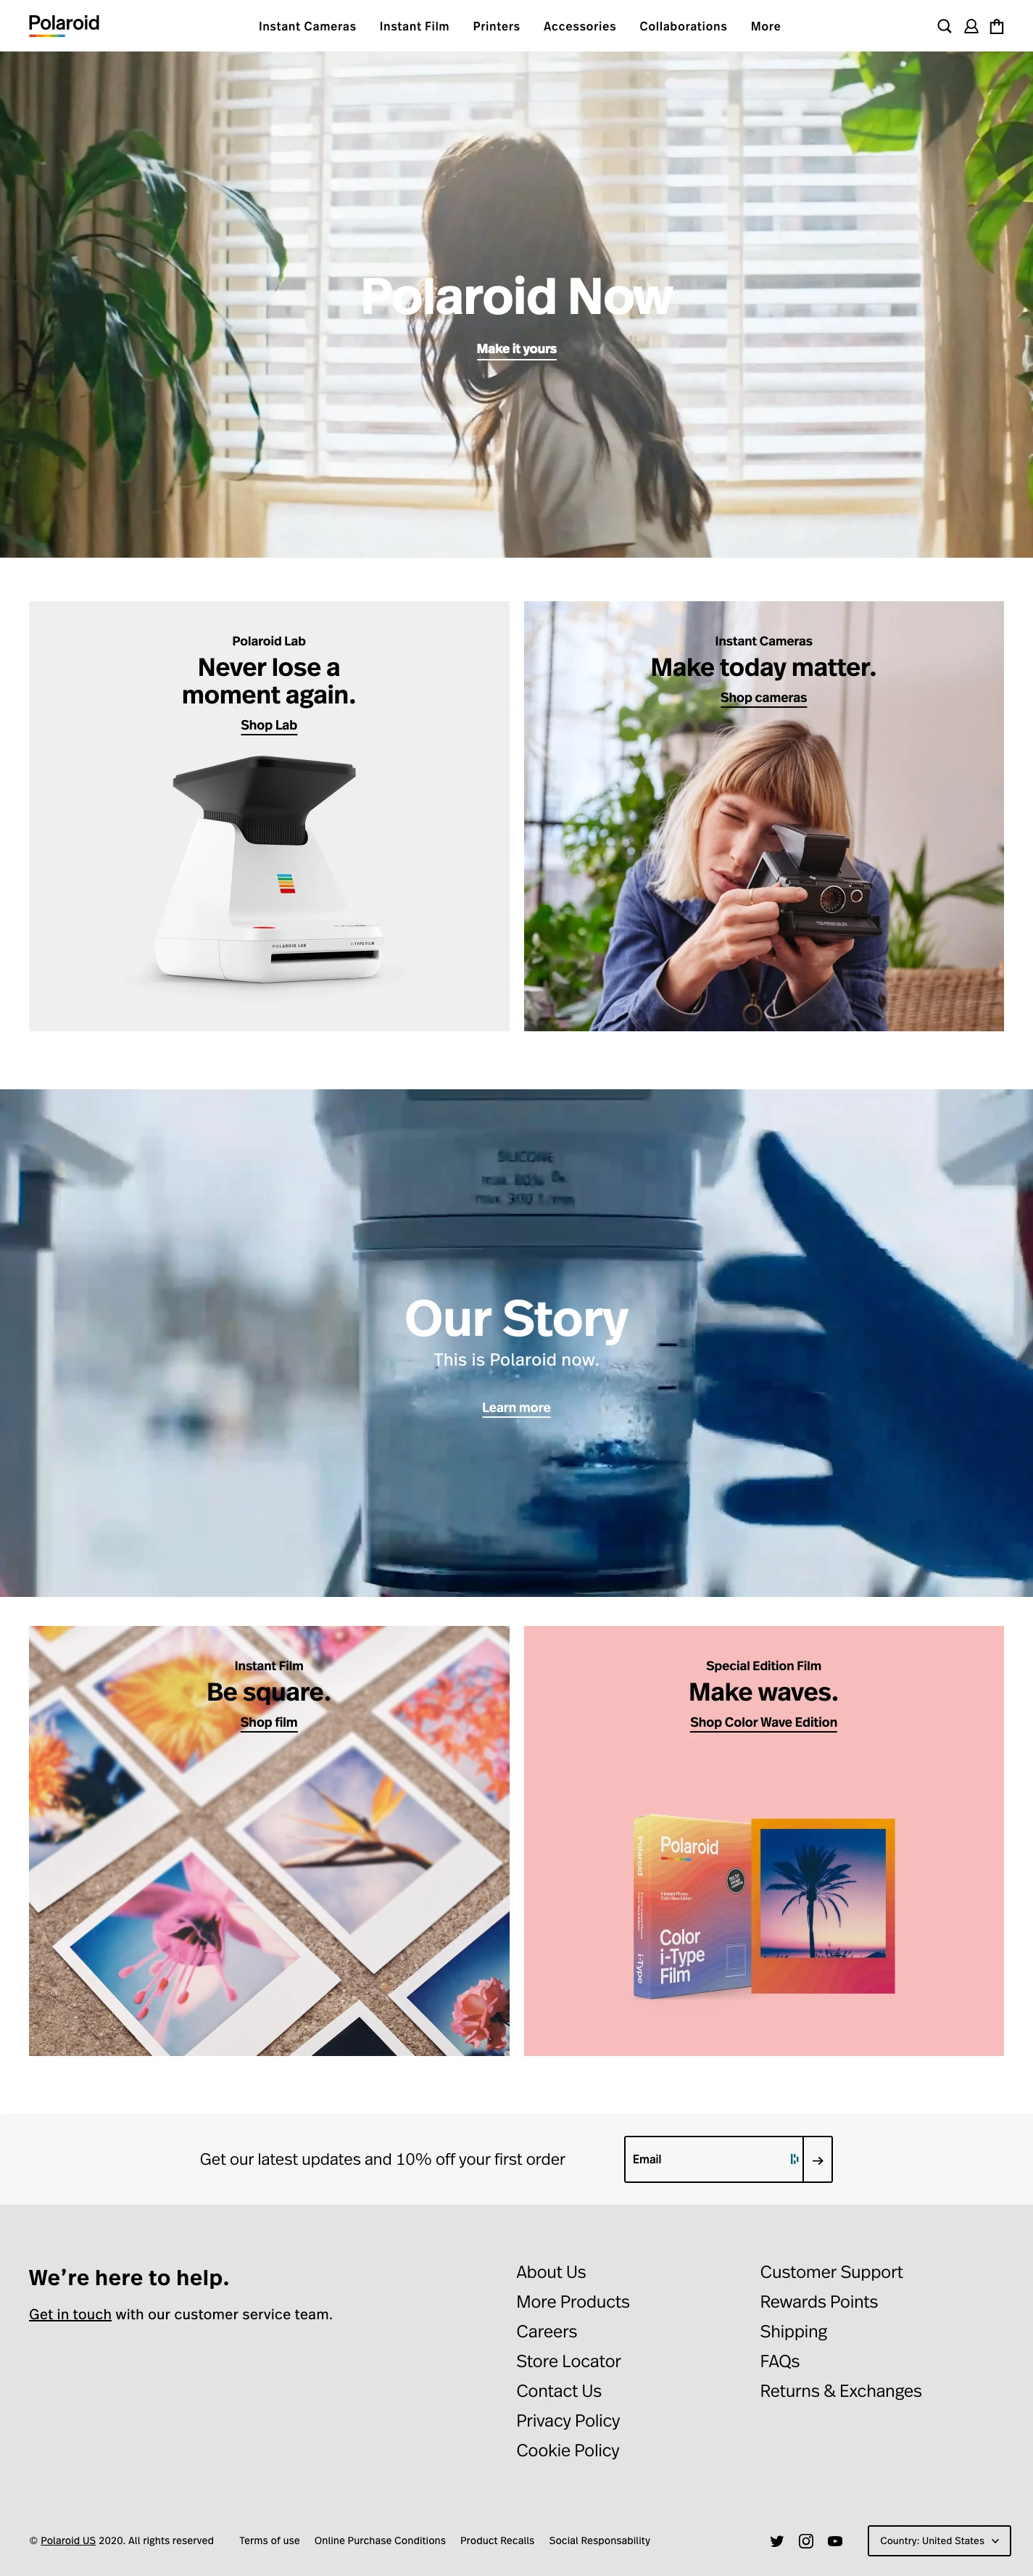 Polaroid Landing Page Example: Polaroid is back. Shop analog instant film, new cameras, vintage cameras, and more from the brand that captured millions of moments with its iconic white frame.